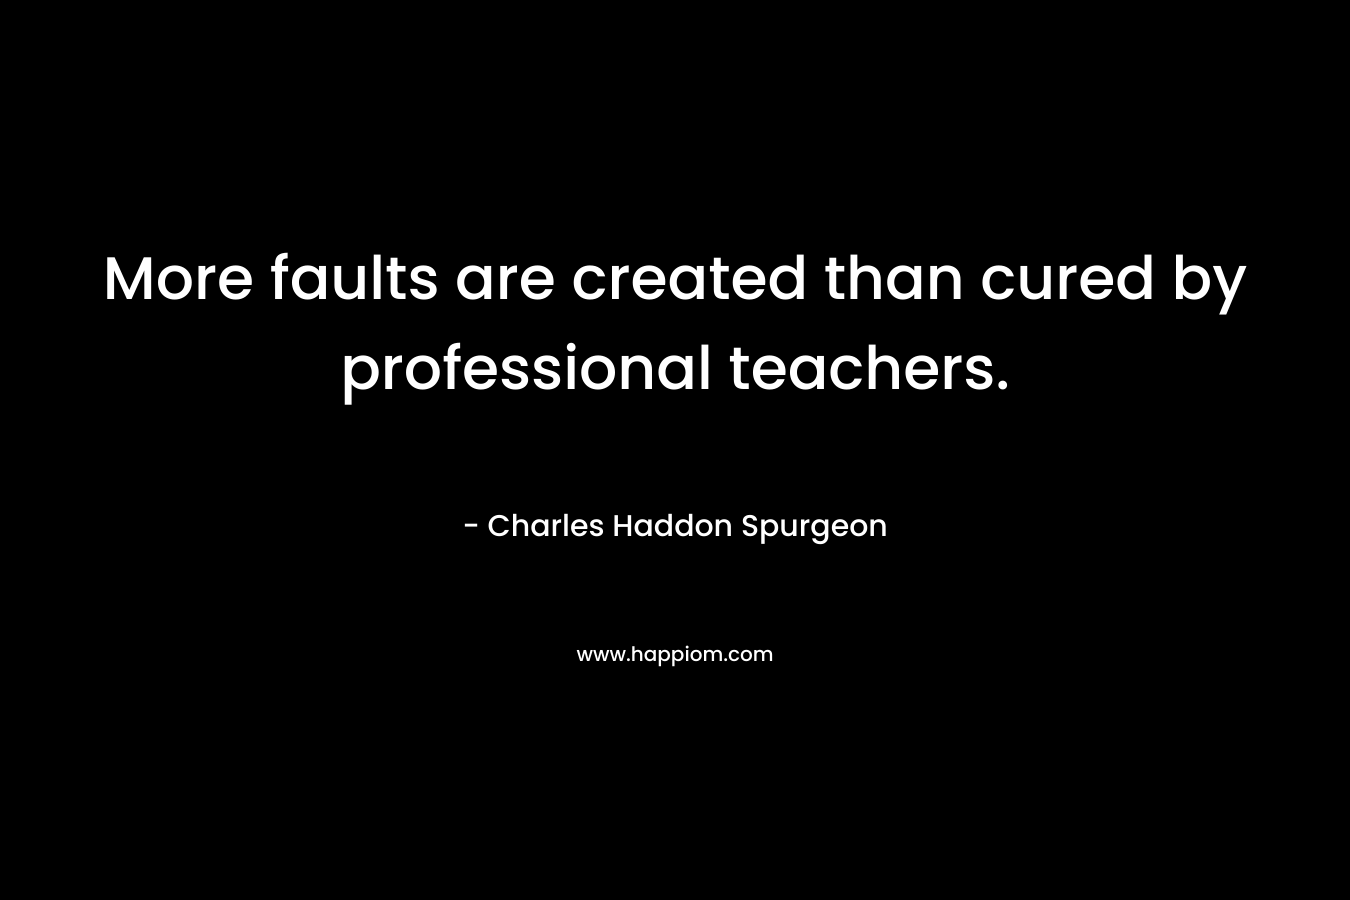 More faults are created than cured by professional teachers. – Charles Haddon Spurgeon